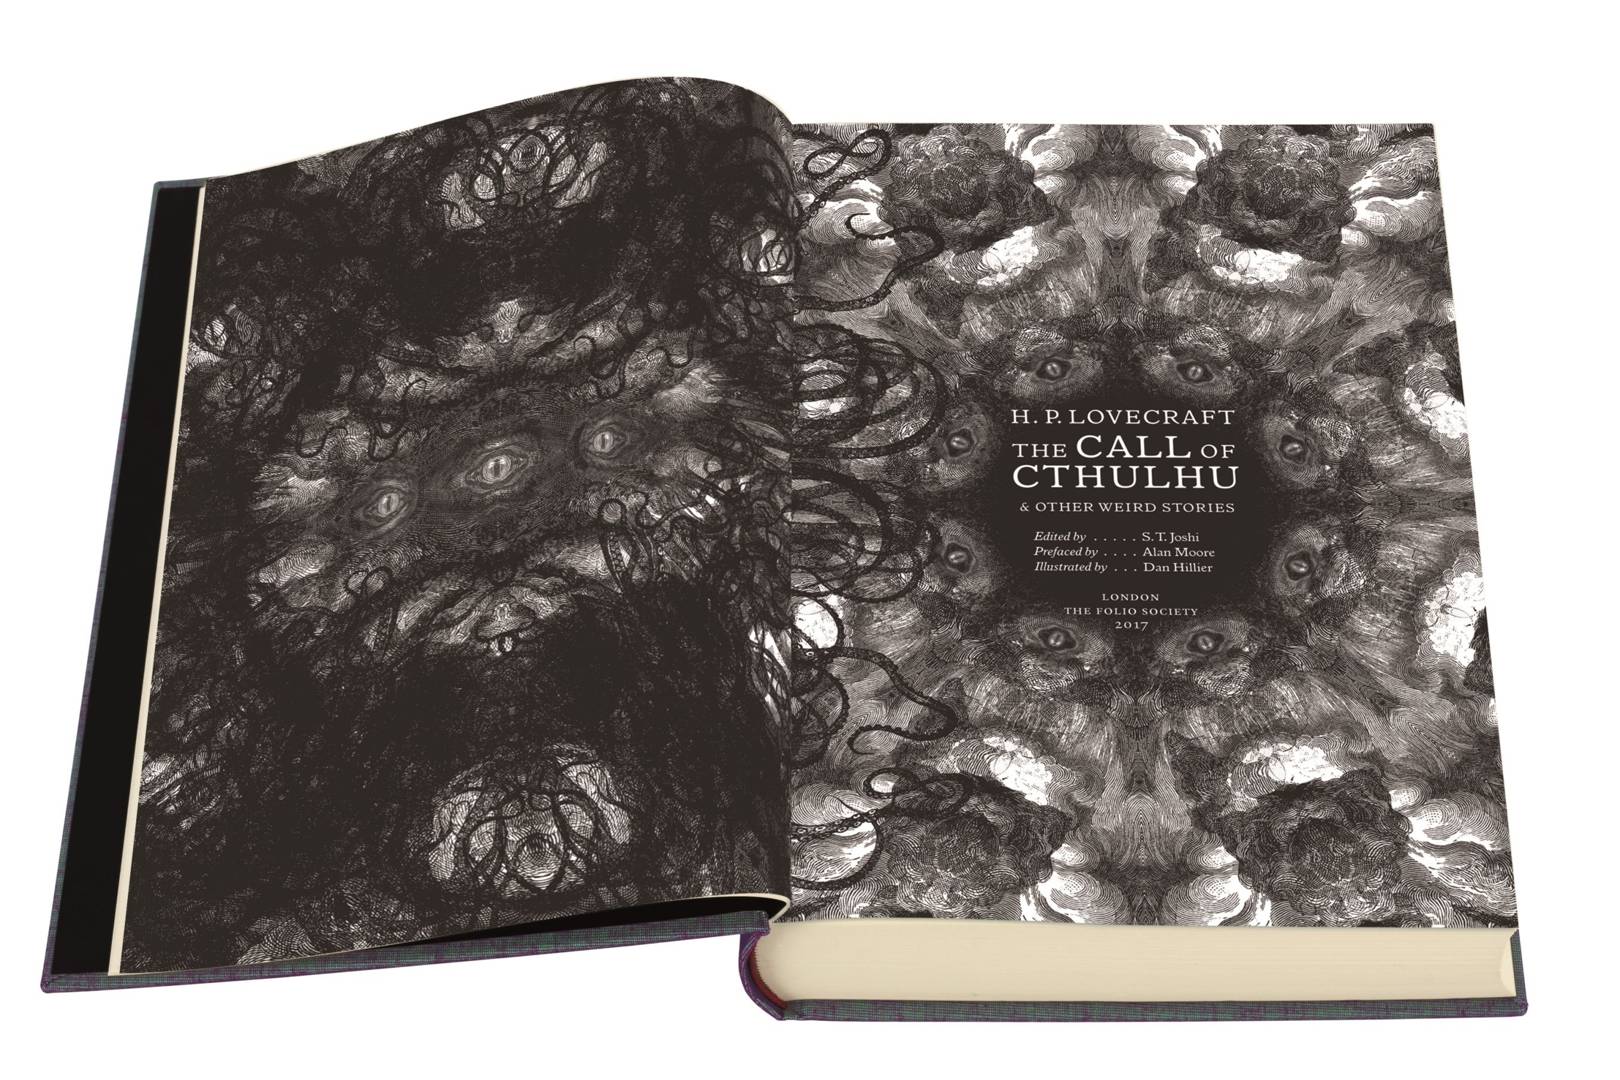 Tremble, for out of the mists comes a new edition of Cthulhu